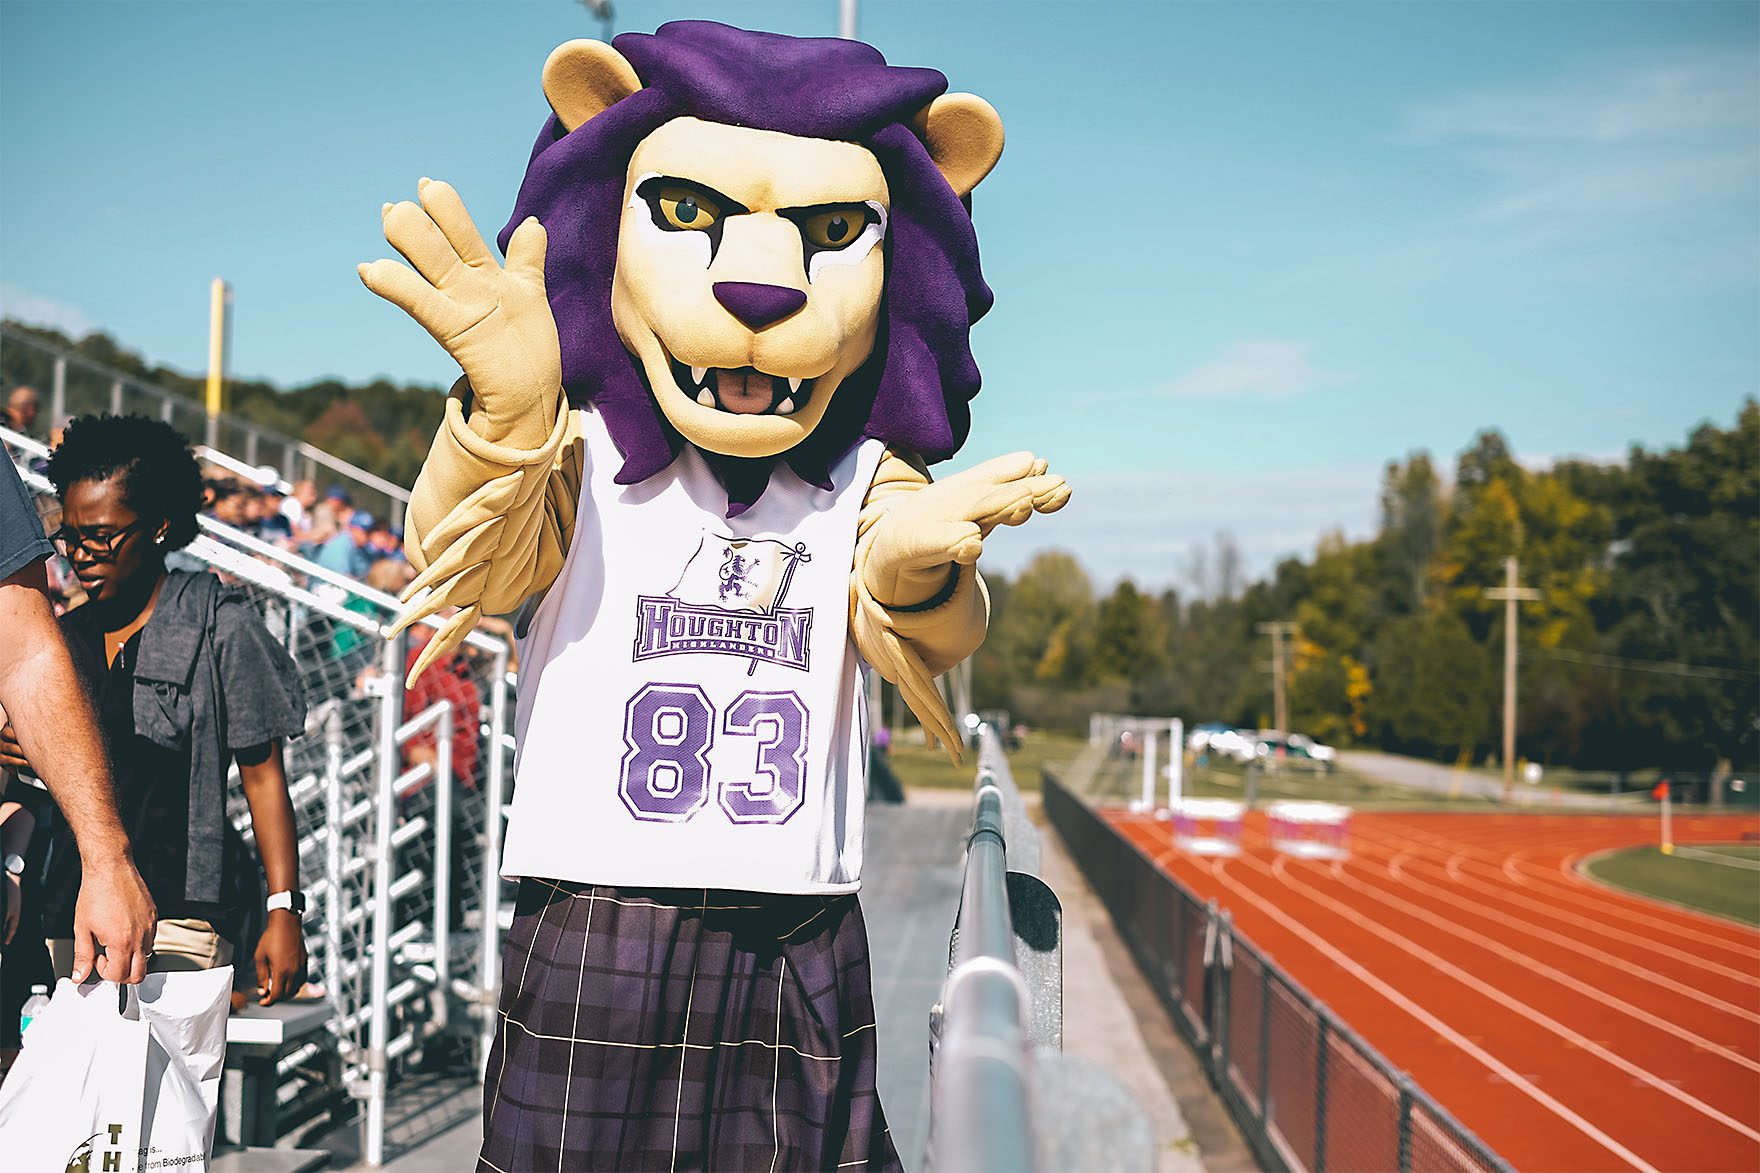 What’s In A (Mascot’s) Name? – Houghton Star